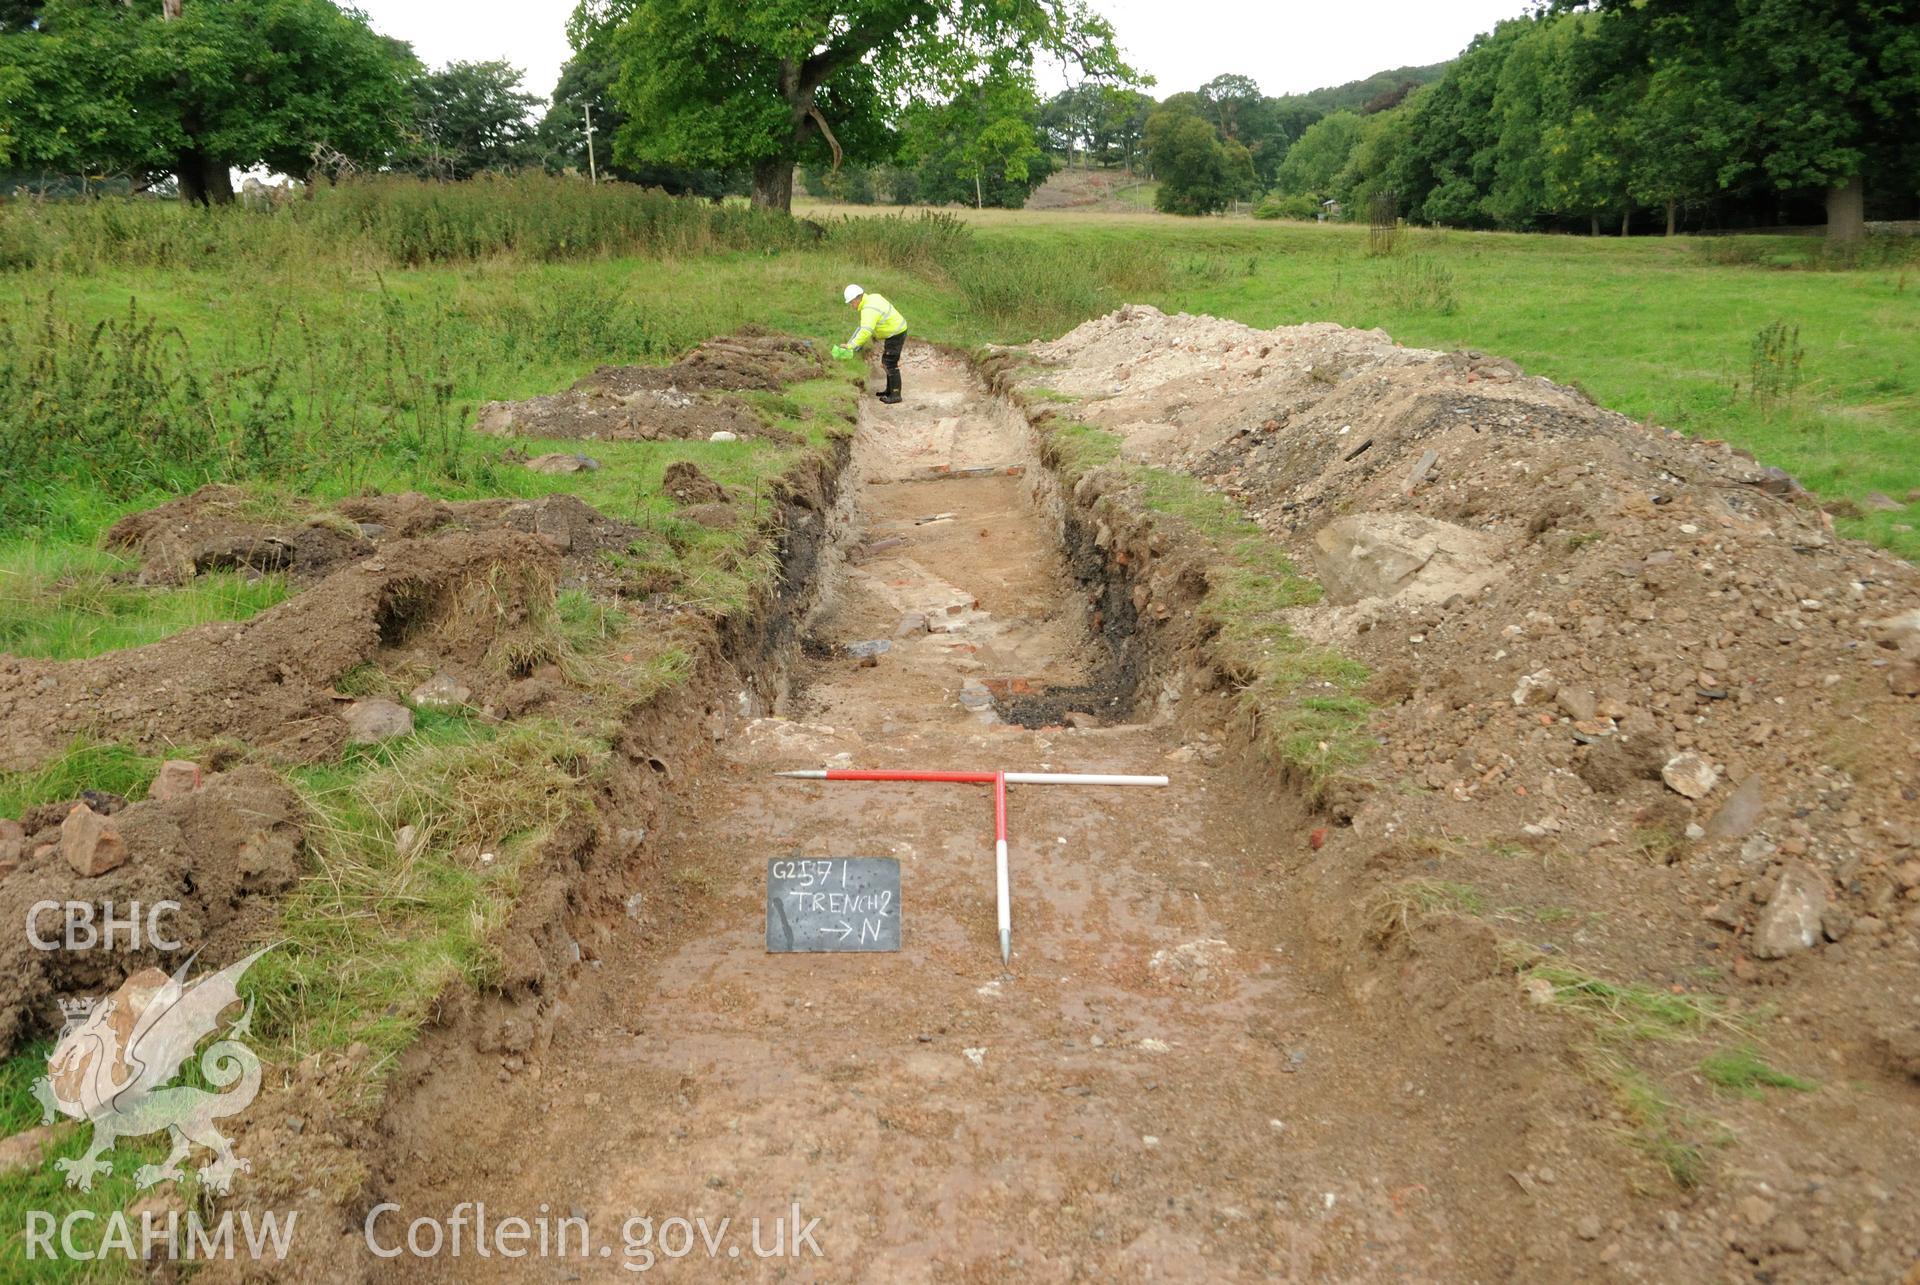 View from the east of Trench 2, post-excavation. Photographed during archaeological evaluation of Kinmel Park, Abergele, conducted by Gwynedd Archaeological Trust on 24th August 2018. Project no. 2571.